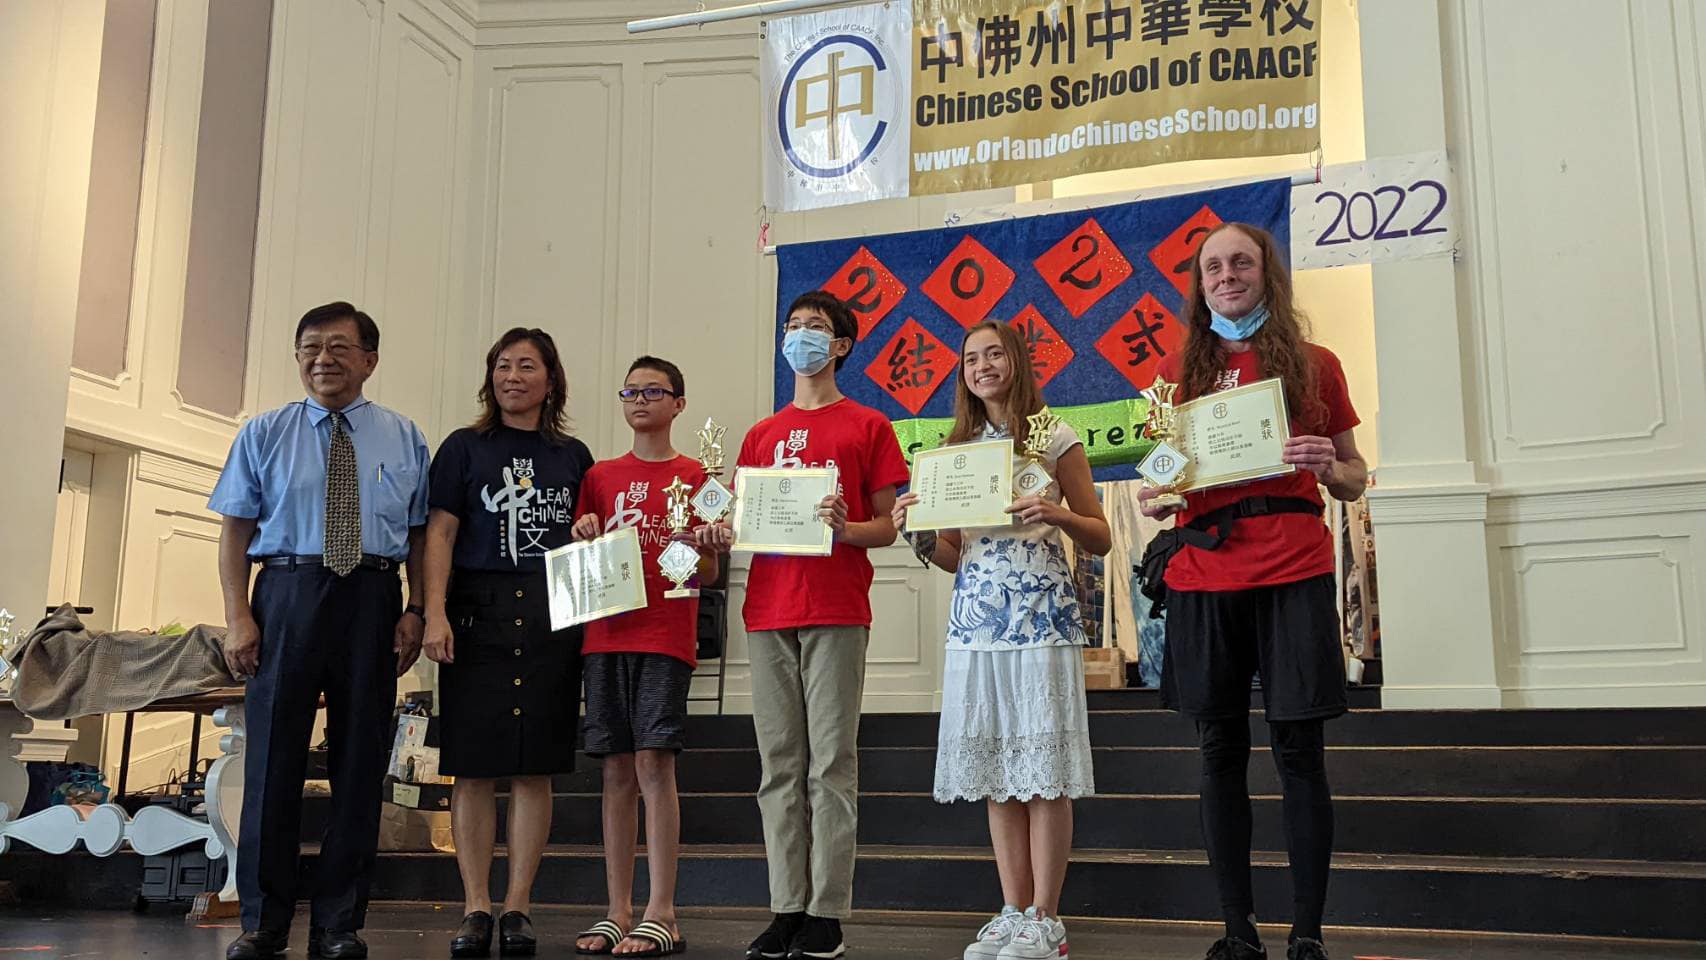 Orlando Chinese School of CAACF held their closing ceremony at the Lake Highland Charles Clayton auditorium